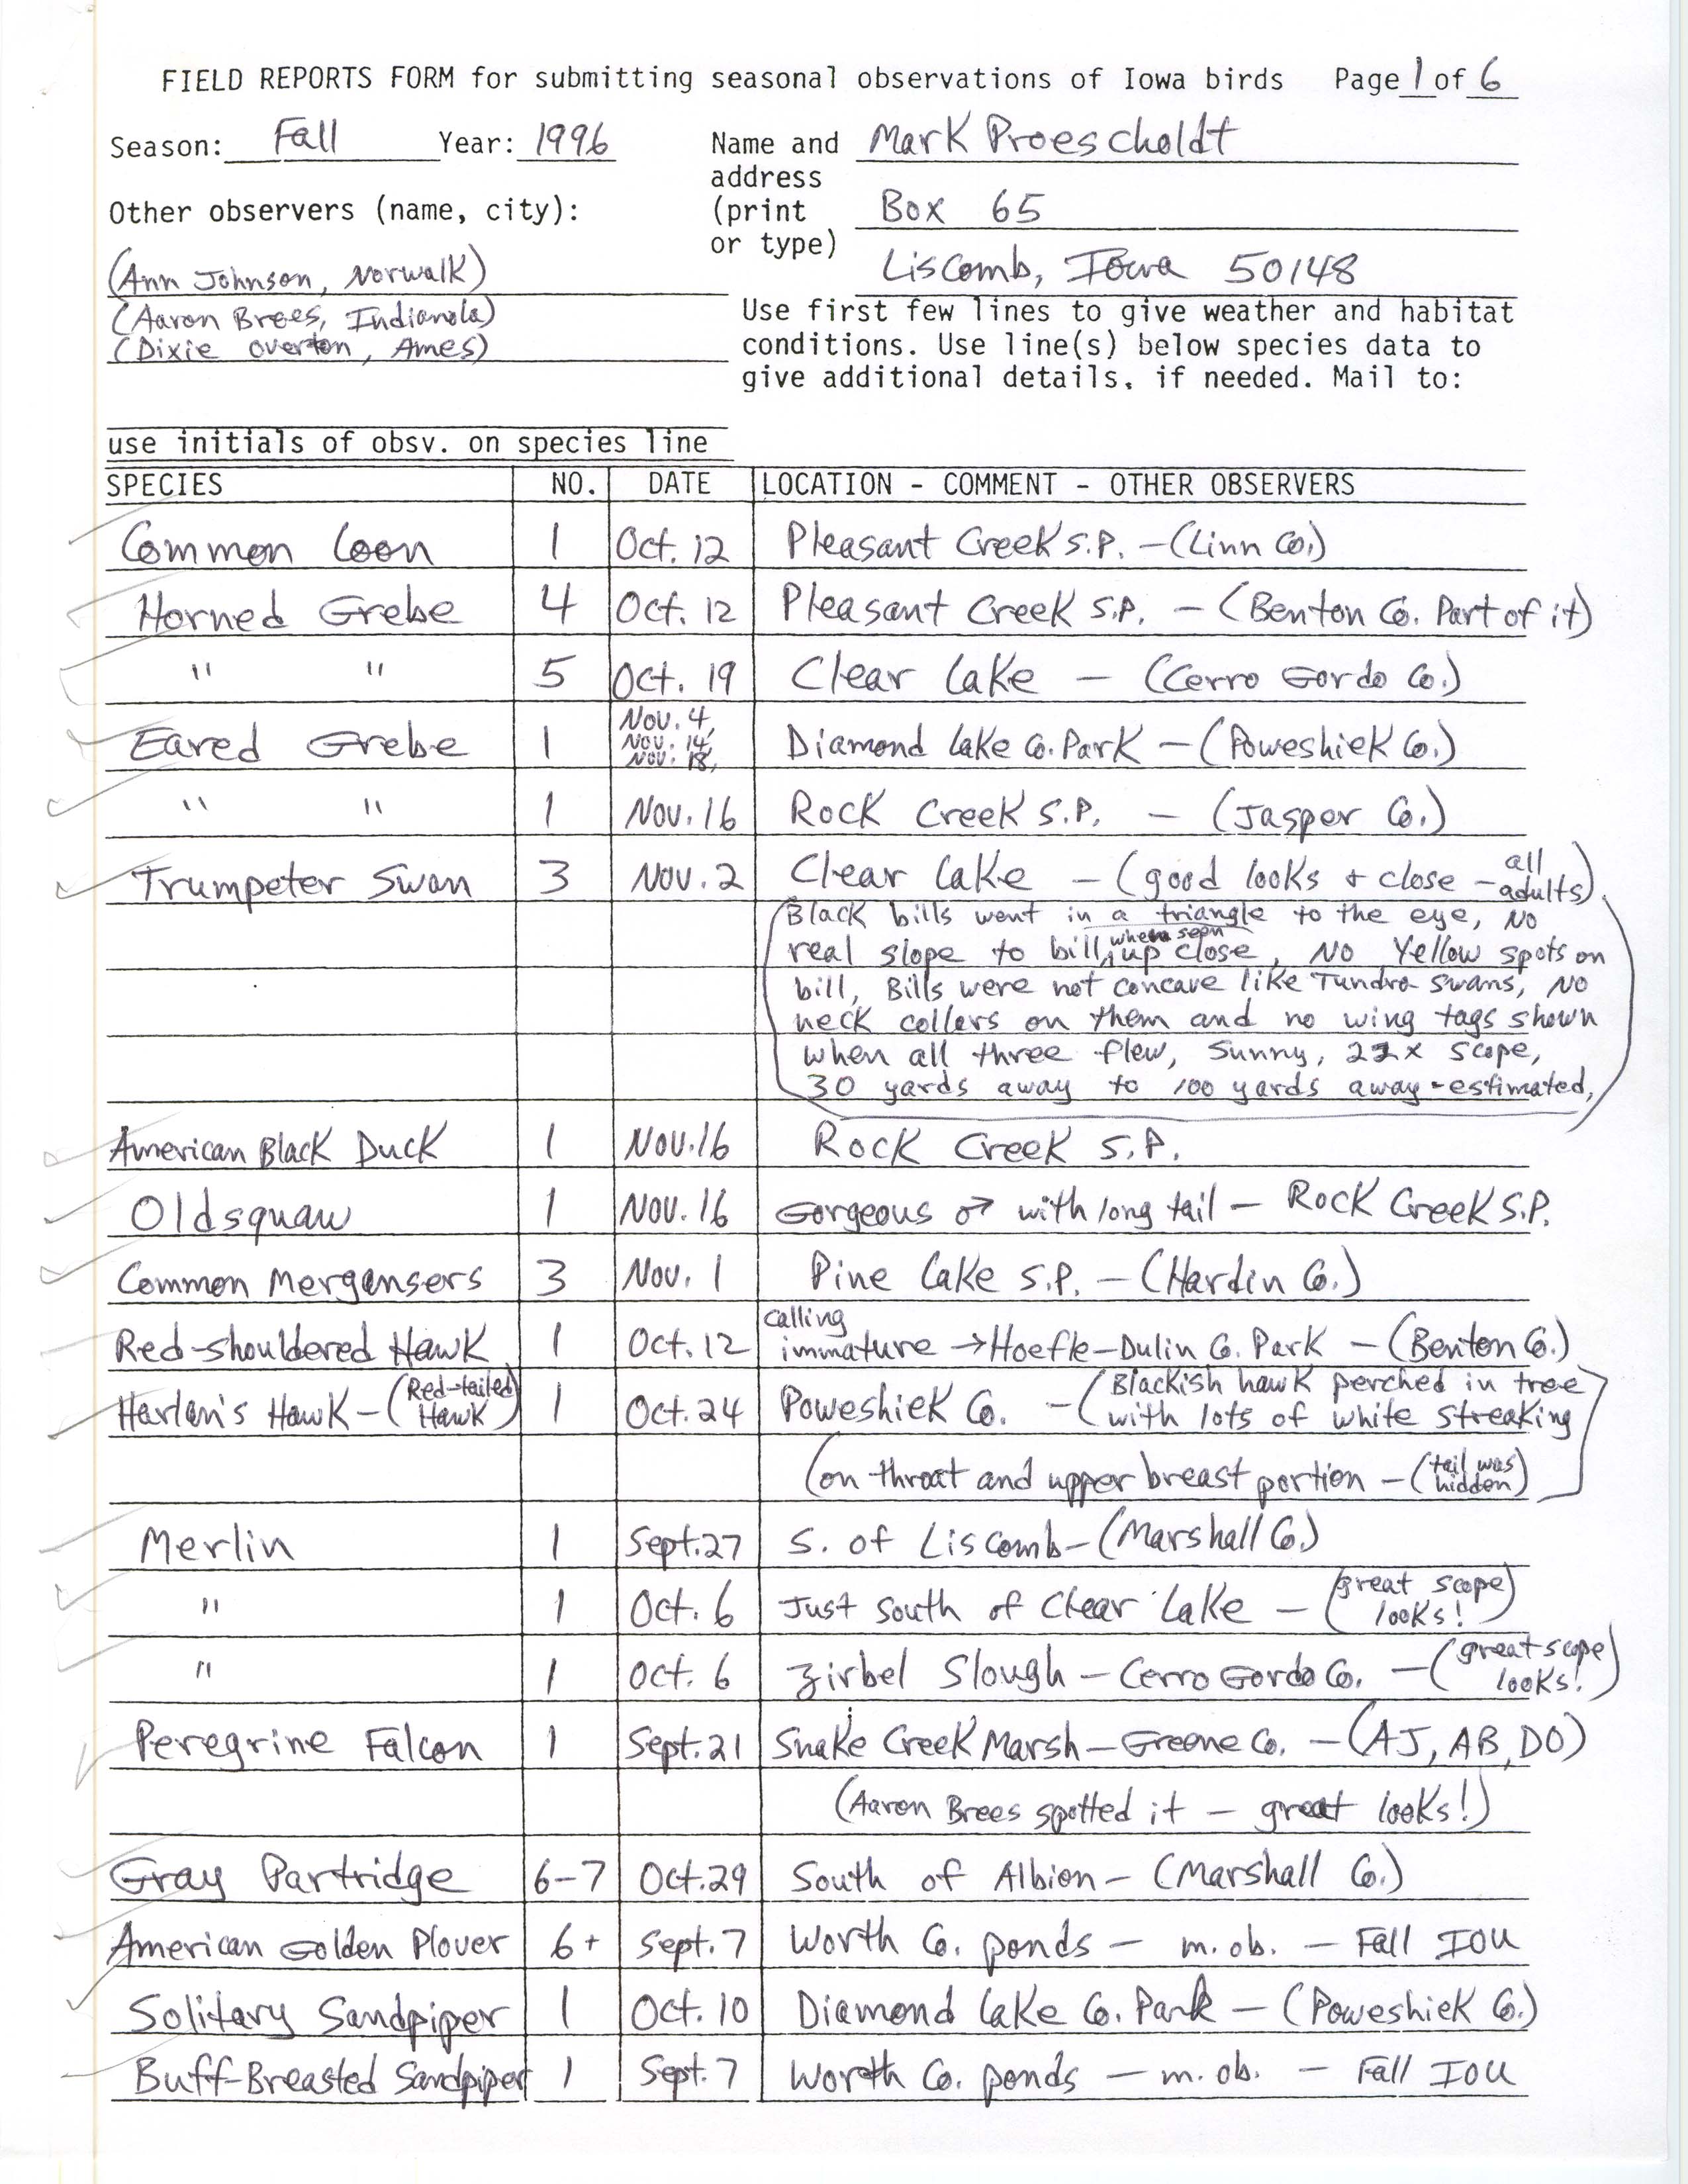 Field reports form for submitting seasonal observations of Iowa birds, Mark Proescholdt, fall 1996